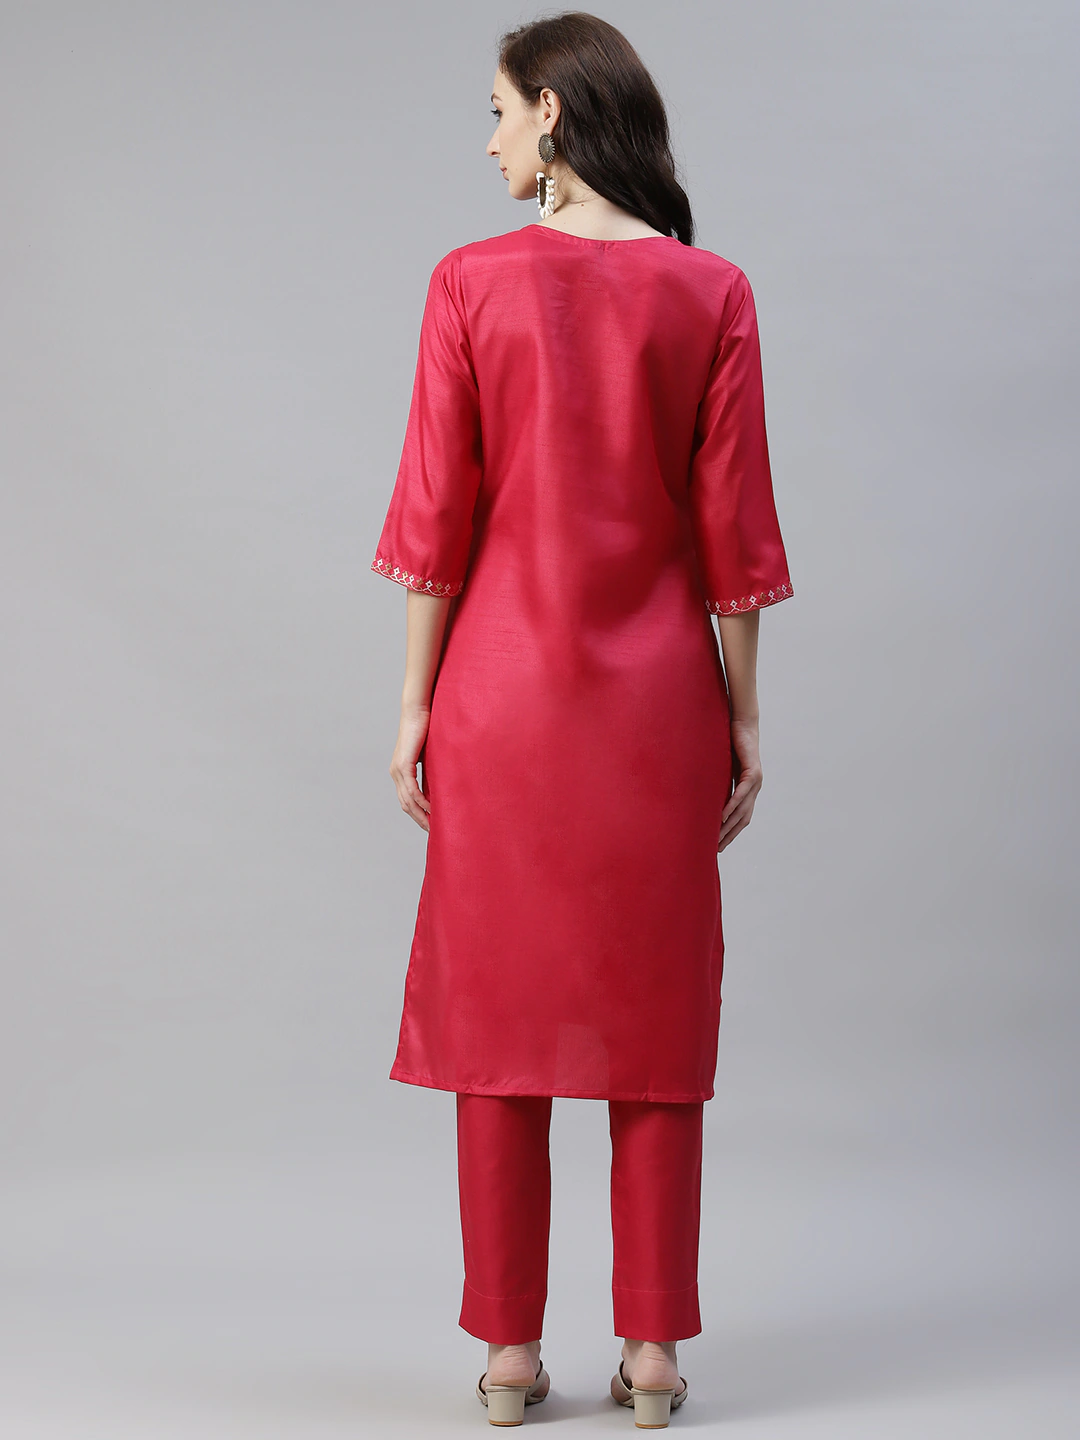 Women Pink & Golden Floral Kurta with Trousers